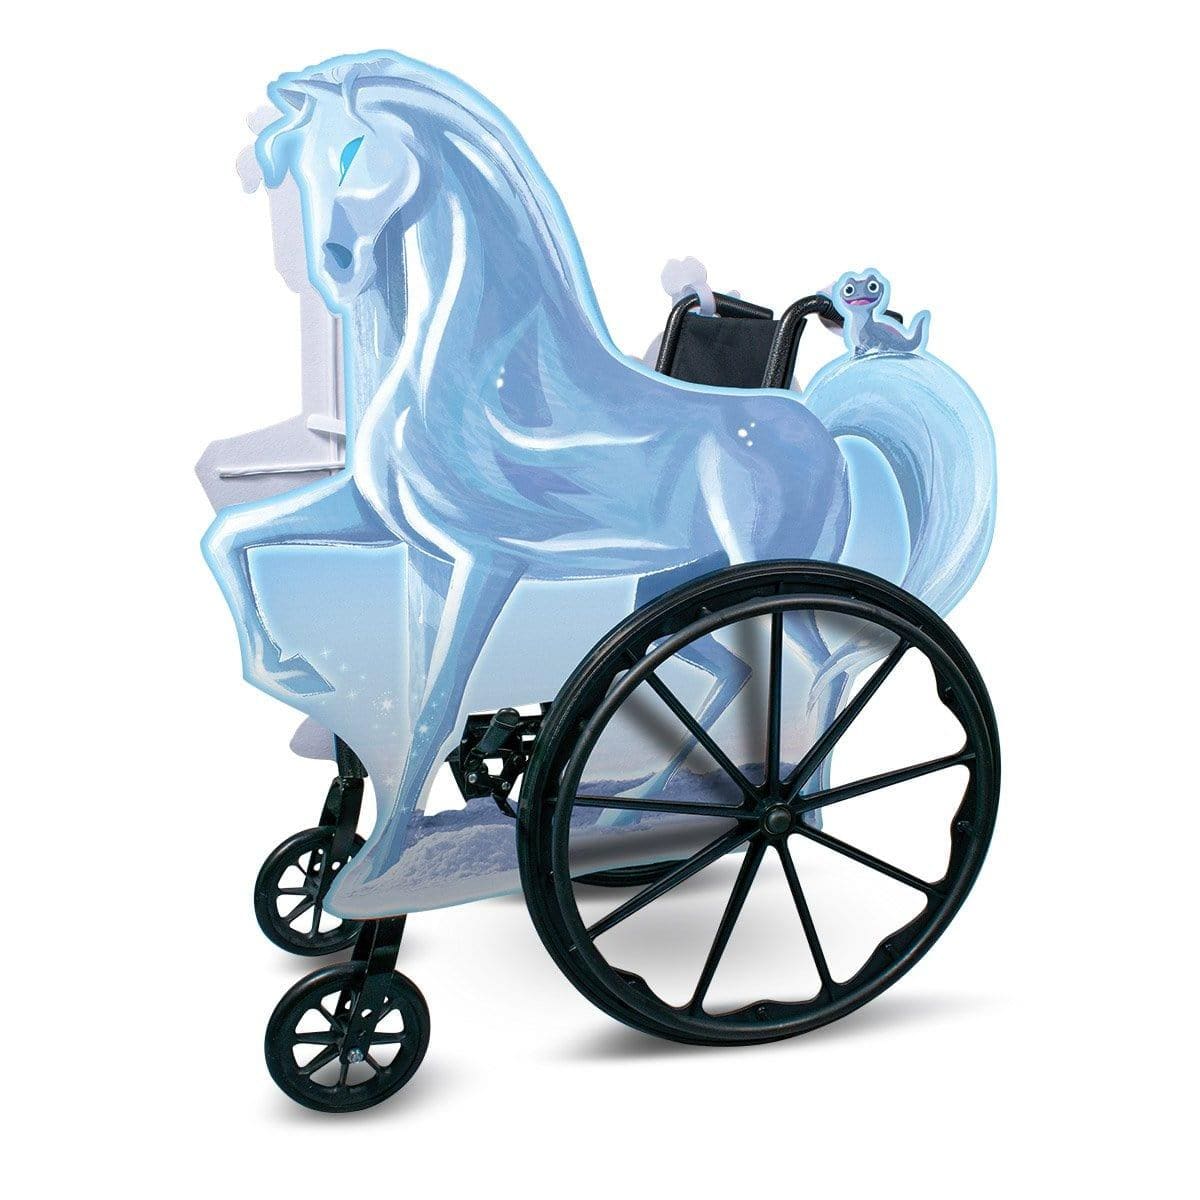 DISGUISE (TOY-SPORT) Costume Accessories Ice Nokk Adaptive Wheelchair Cover, Frozen 2 192995121195